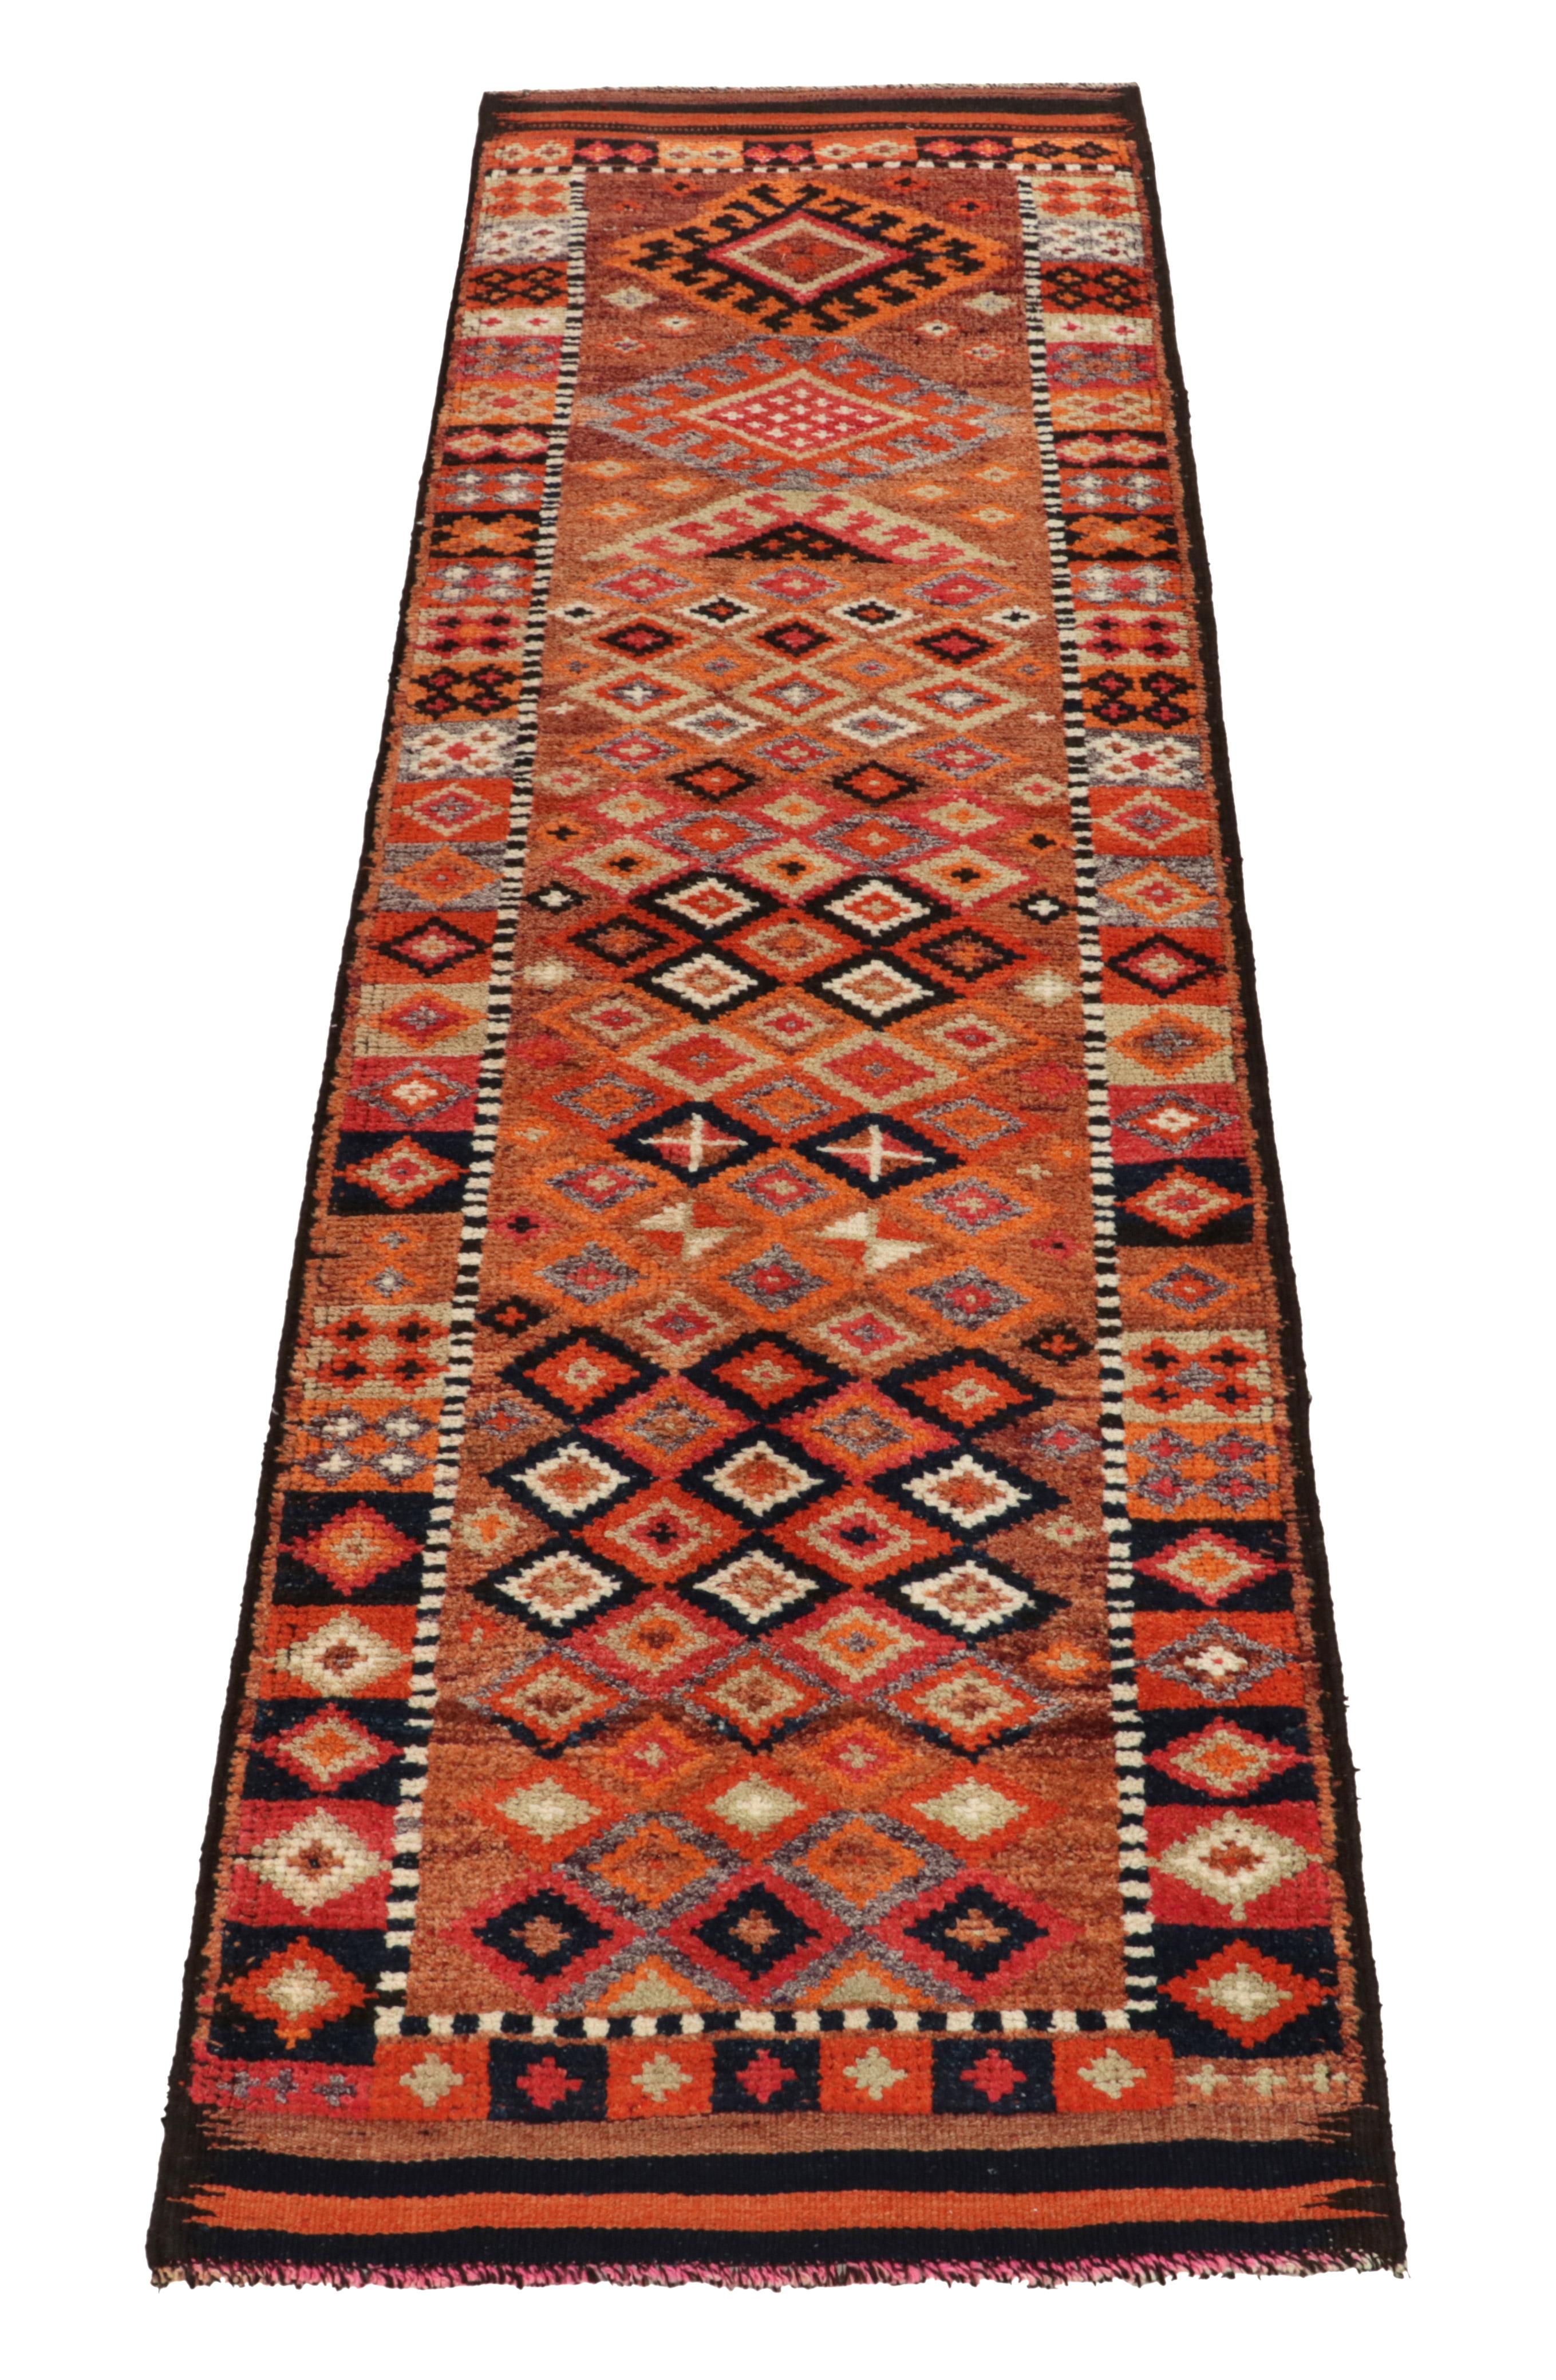 Hand-knotted in wool, a 3x10 runner from Rug & Kilim’s latest curation of rare tribal rugs. 

Originating from Turkey circa 1950-1960, the piece enjoys diamond patterns with latch hooks on the field outlined by traditional motifs in rich tones of